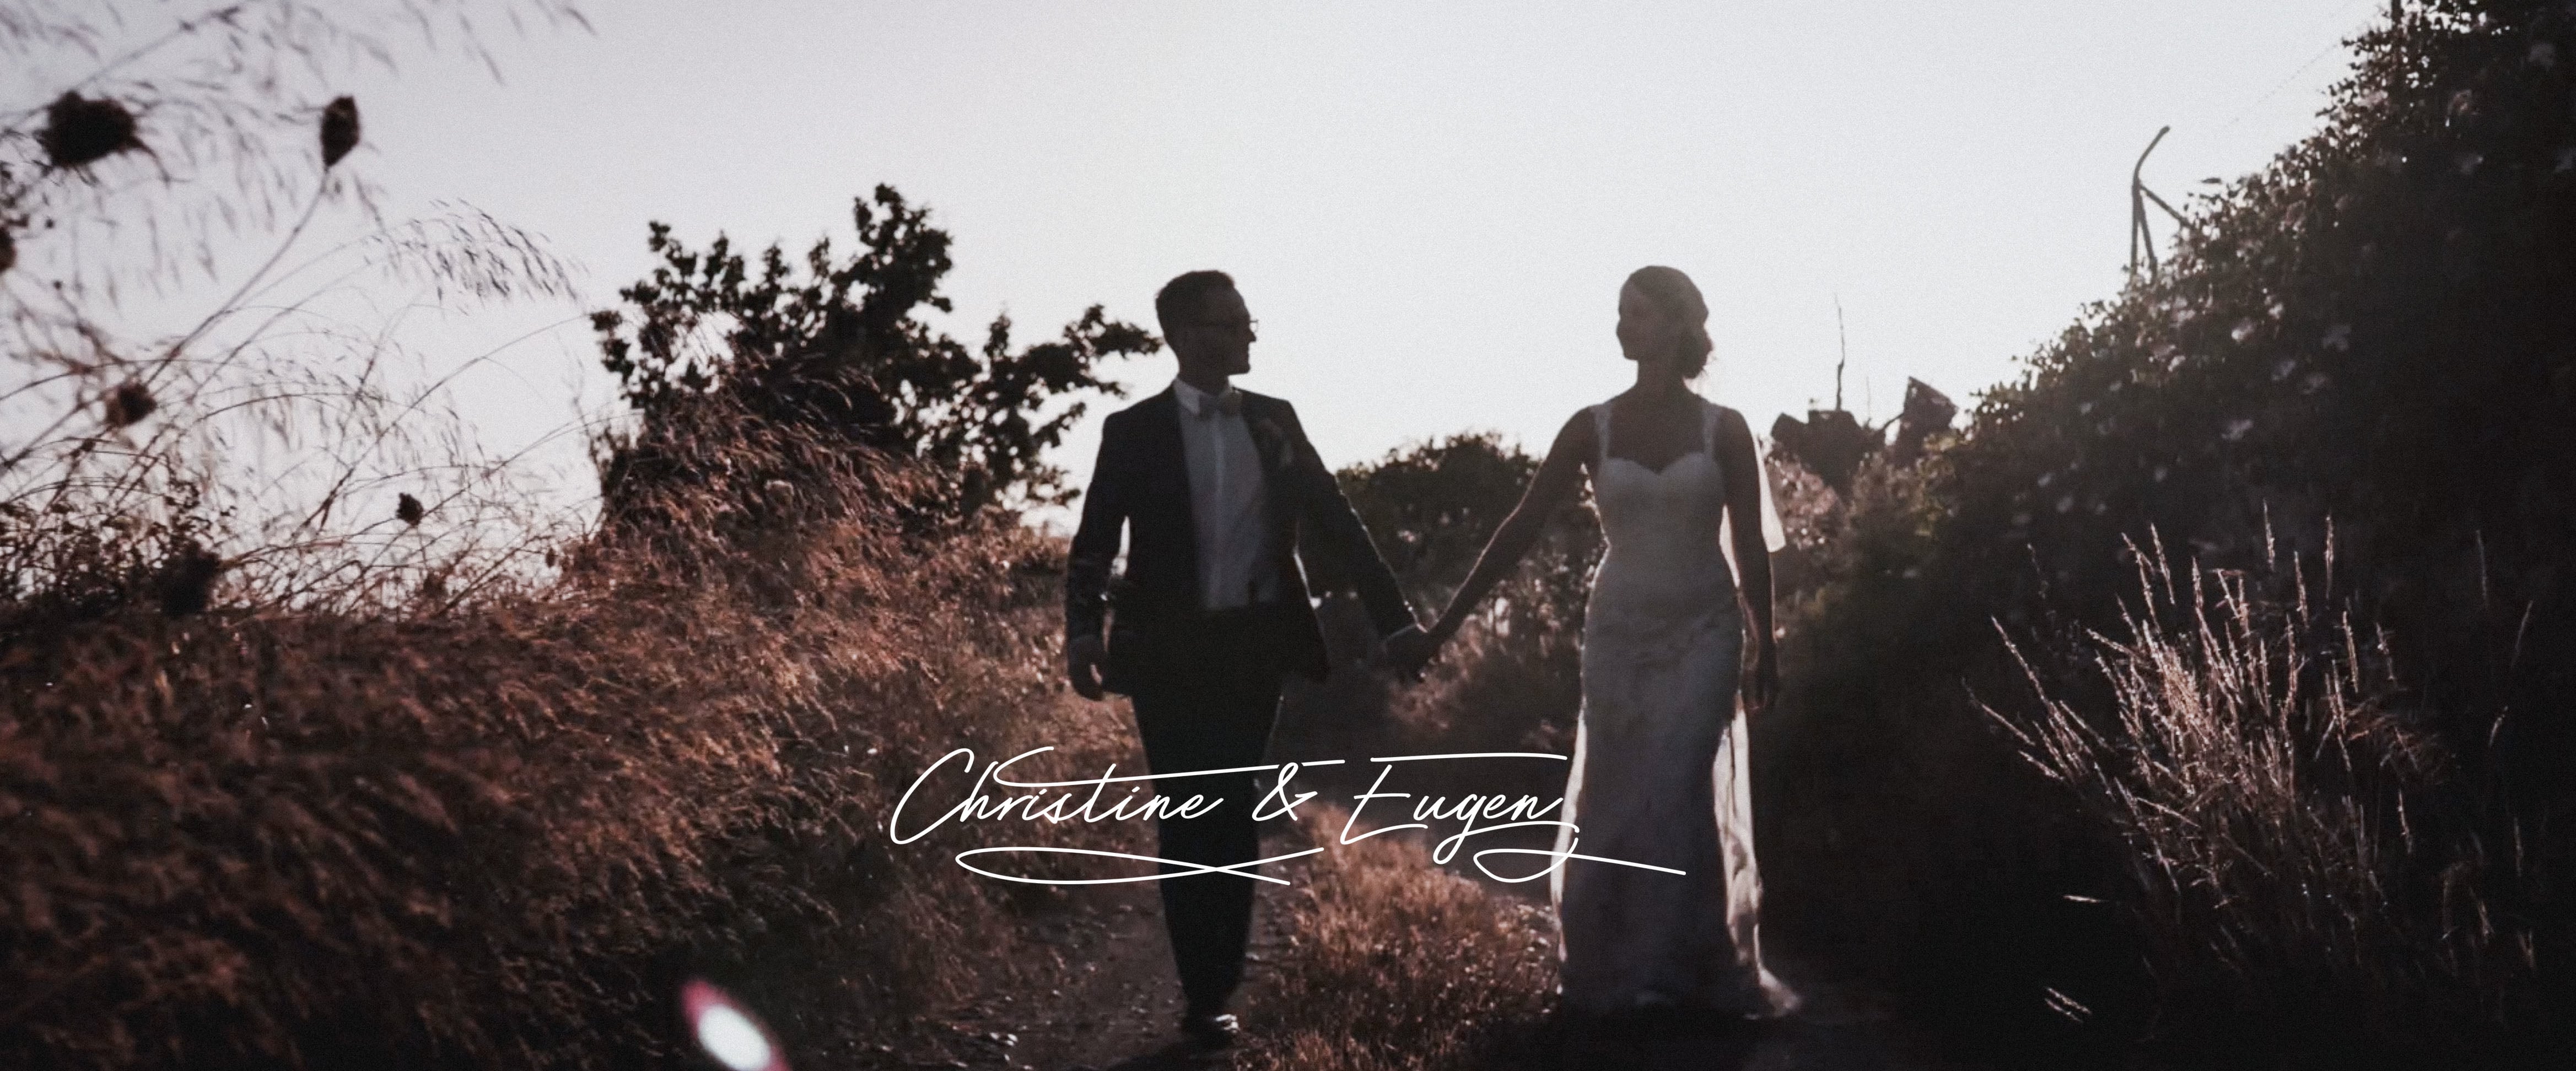 Storytellers - Wedding Films and Photography